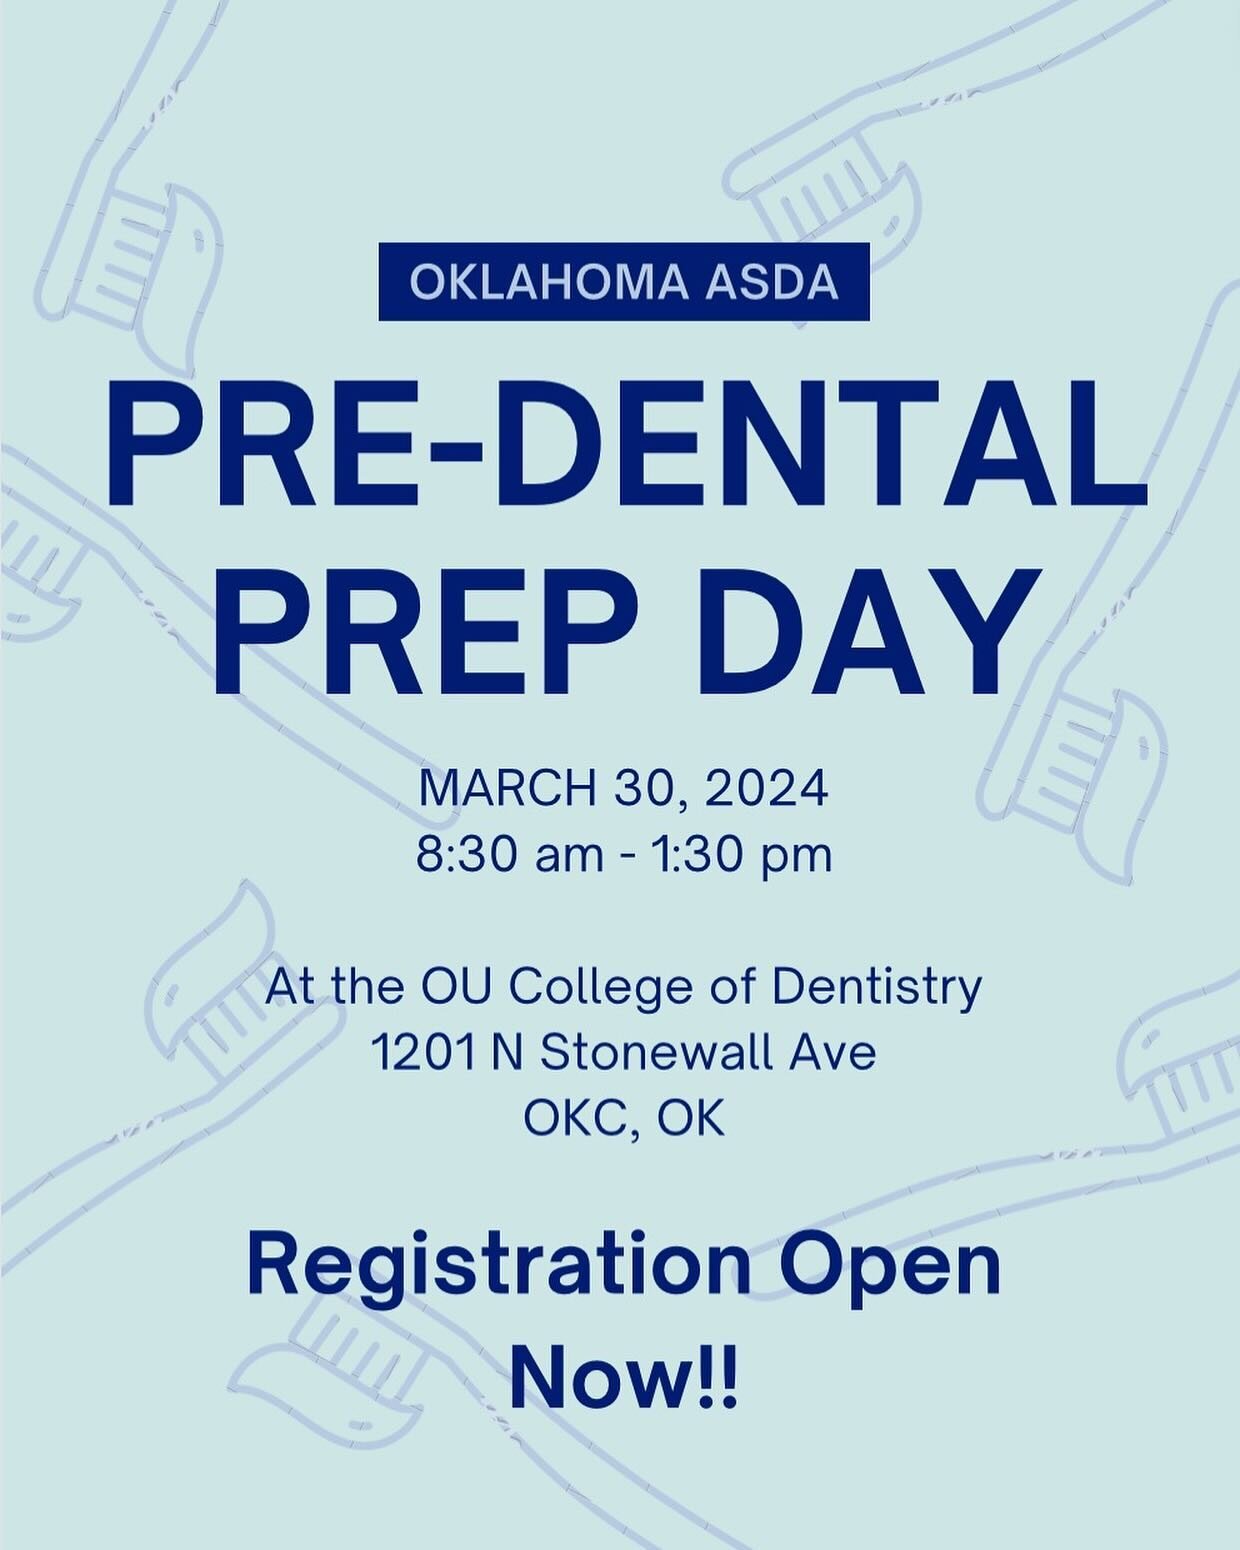 Registration is now open!!! We are so excited to see you all there 🦷😌 
Link here and in bio: https://oklahomaasda.org/pre-dental-prep-day